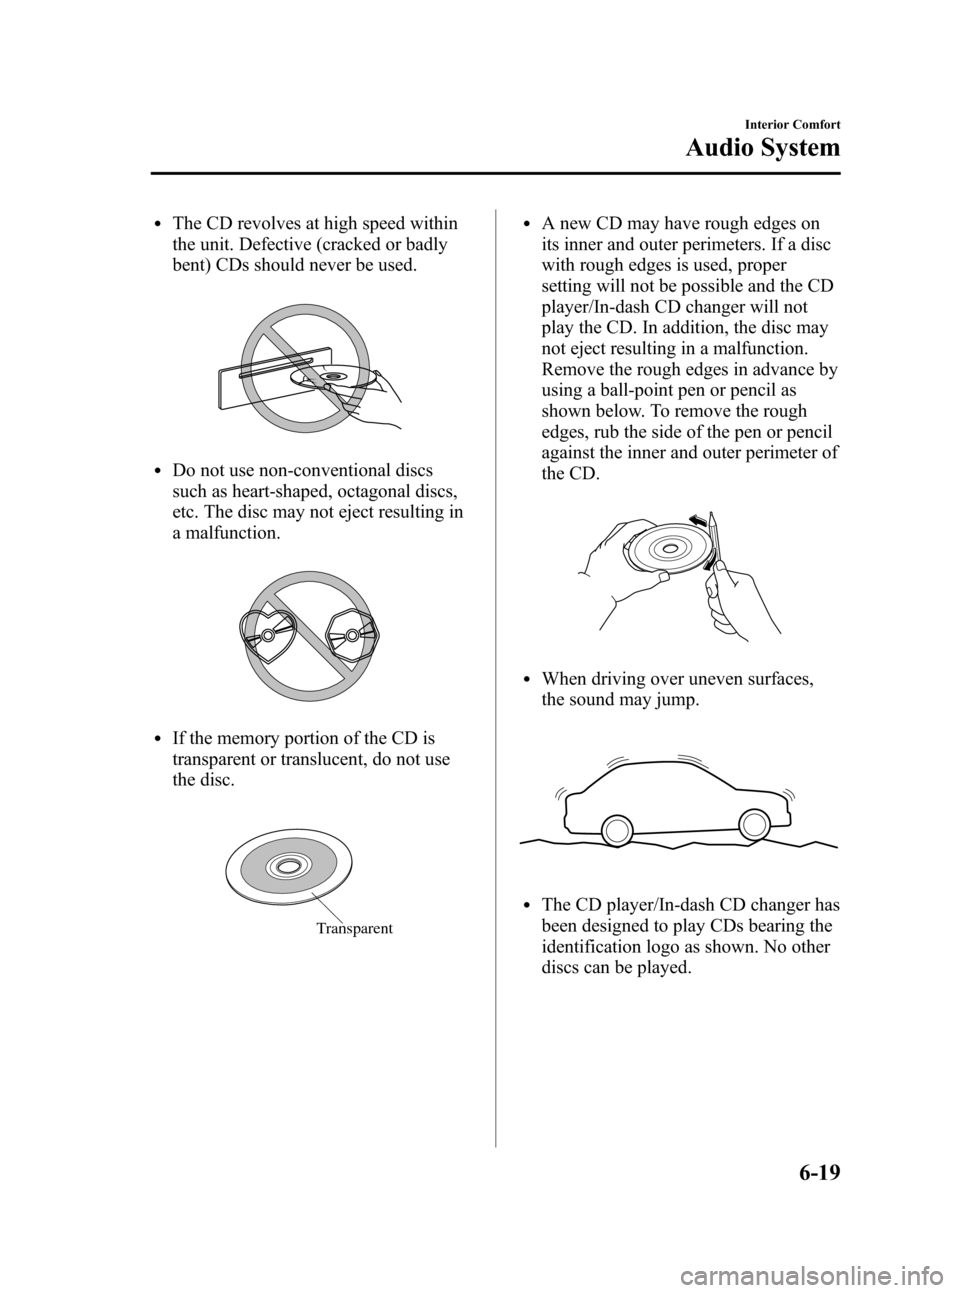 MAZDA MODEL CX-7 2009  Owners Manual (in English) Black plate (241,1)
lThe CD revolves at high speed within
the unit. Defective (cracked or badly
bent) CDs should never be used.
lDo not use non-conventional discs
such as heart-shaped, octagonal discs